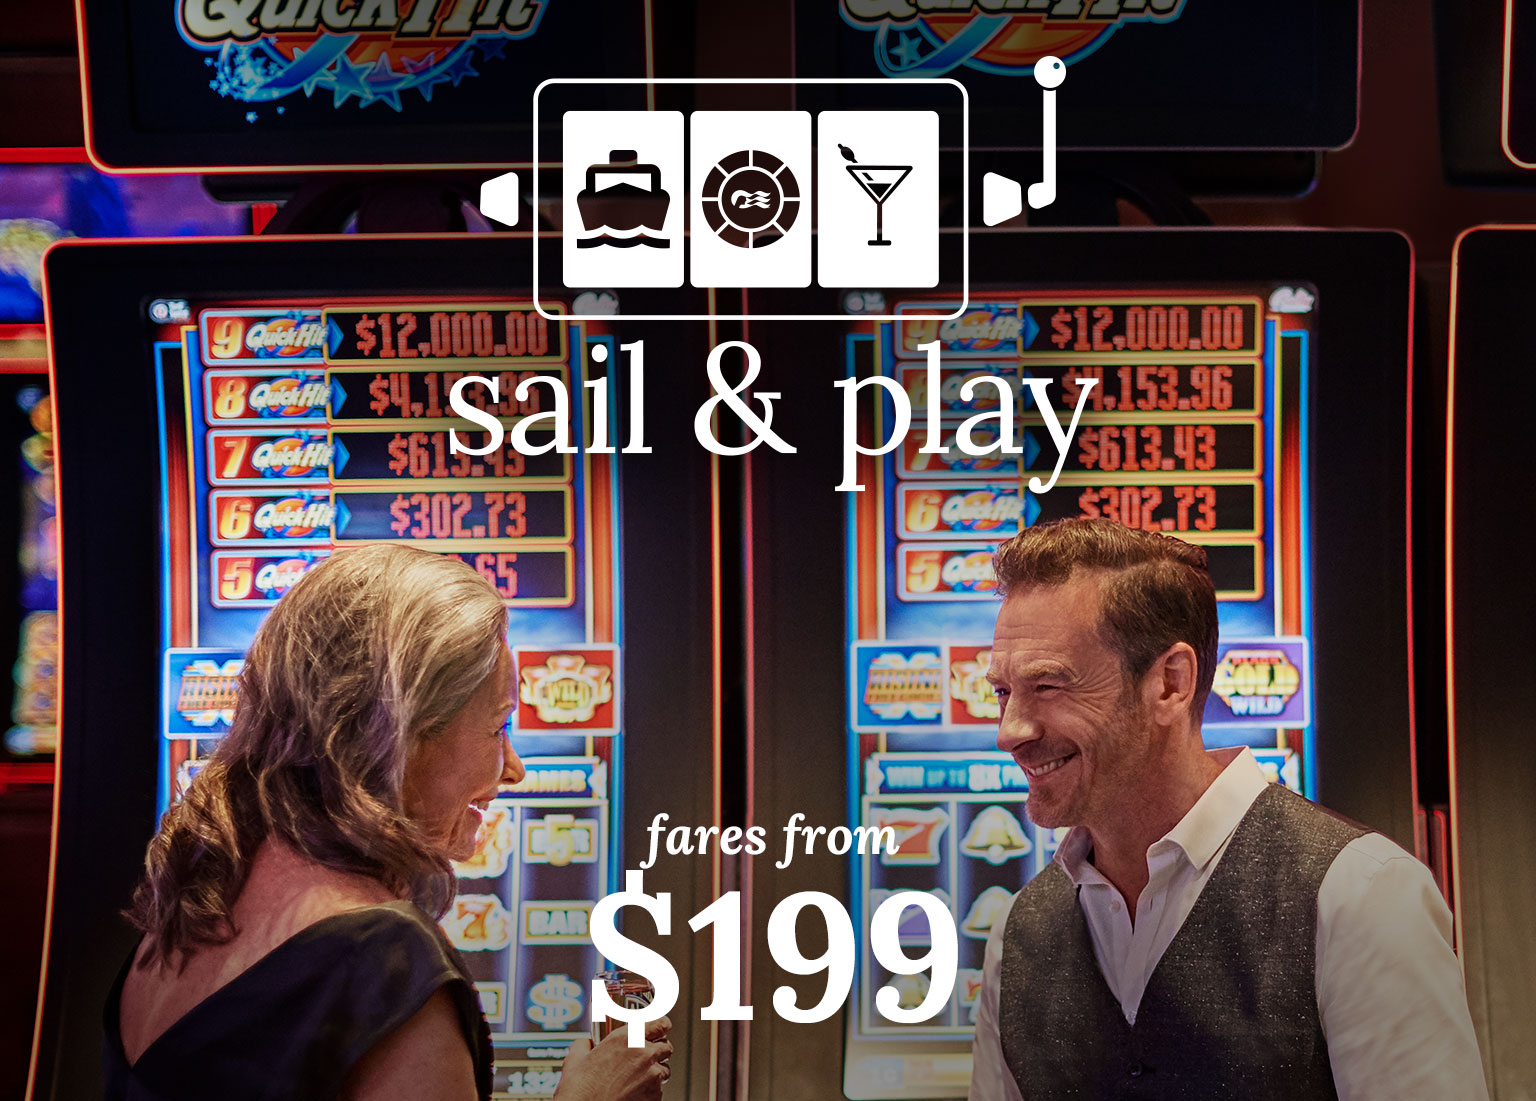 sail & play - fares from $199